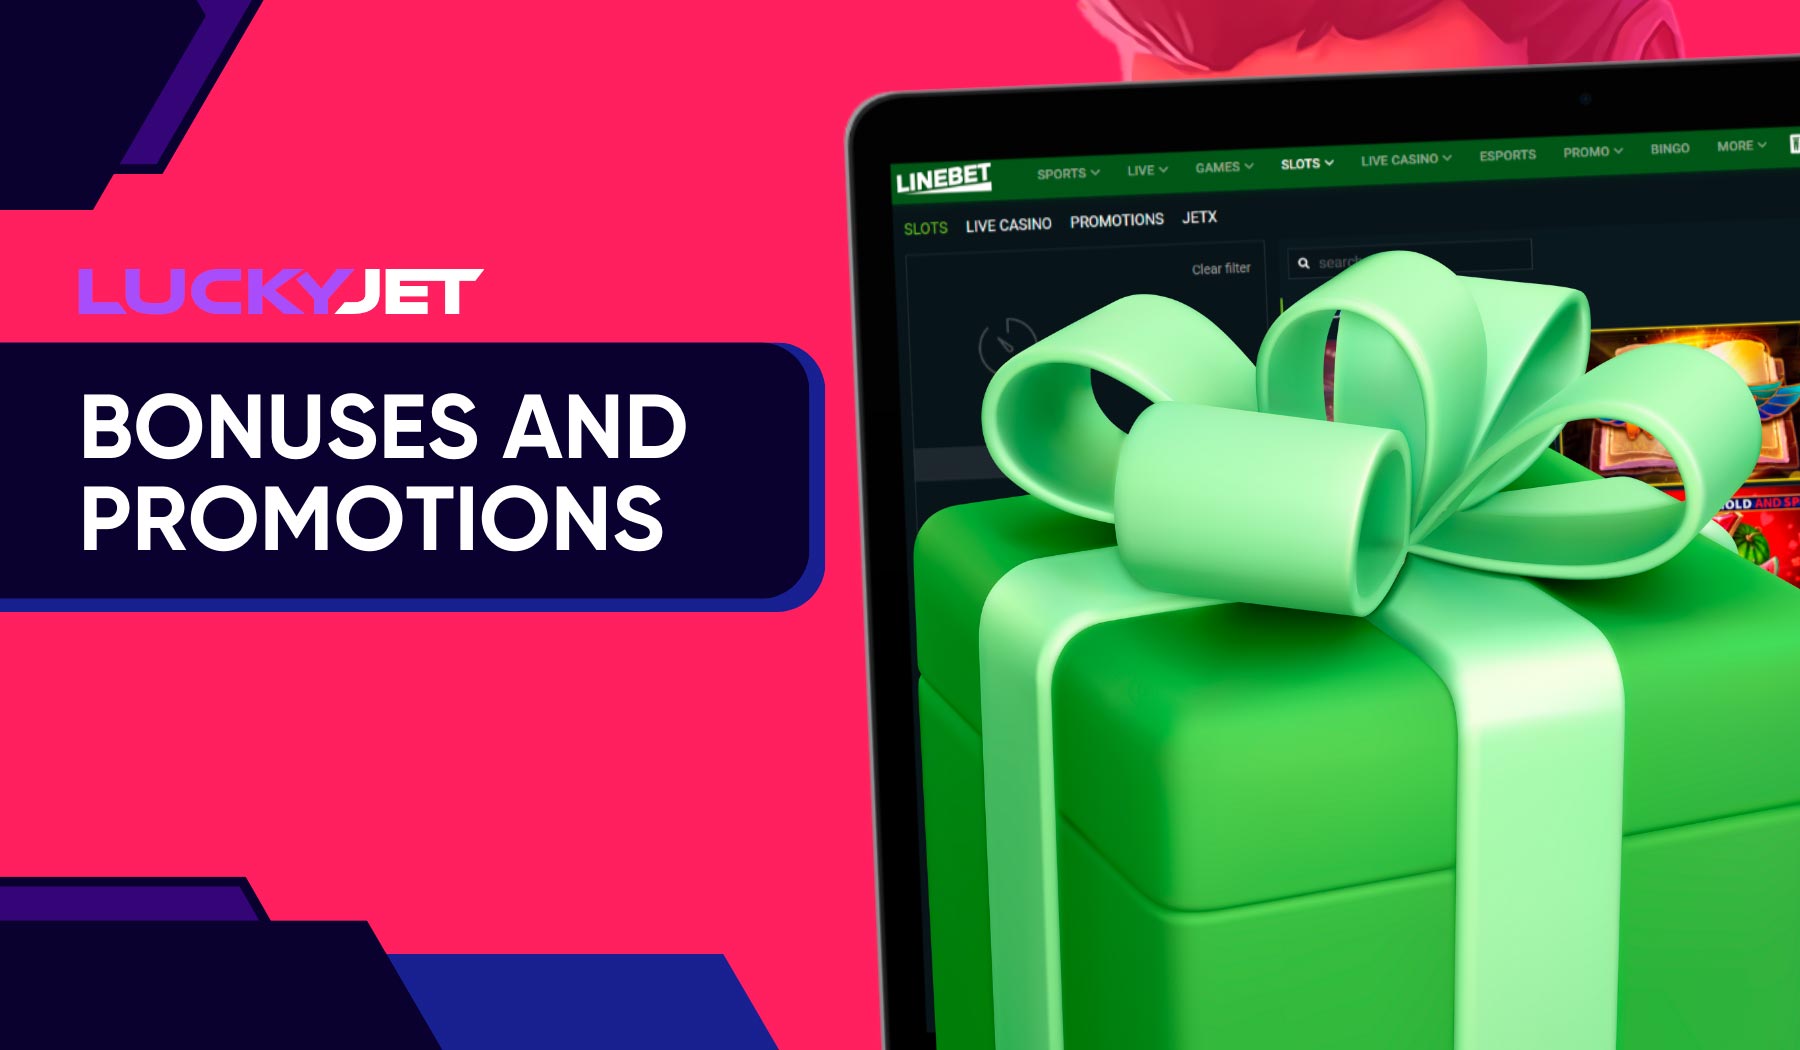 Lucky Jet at Linebet has tempting bonuses and promotions specially designed for Indian players